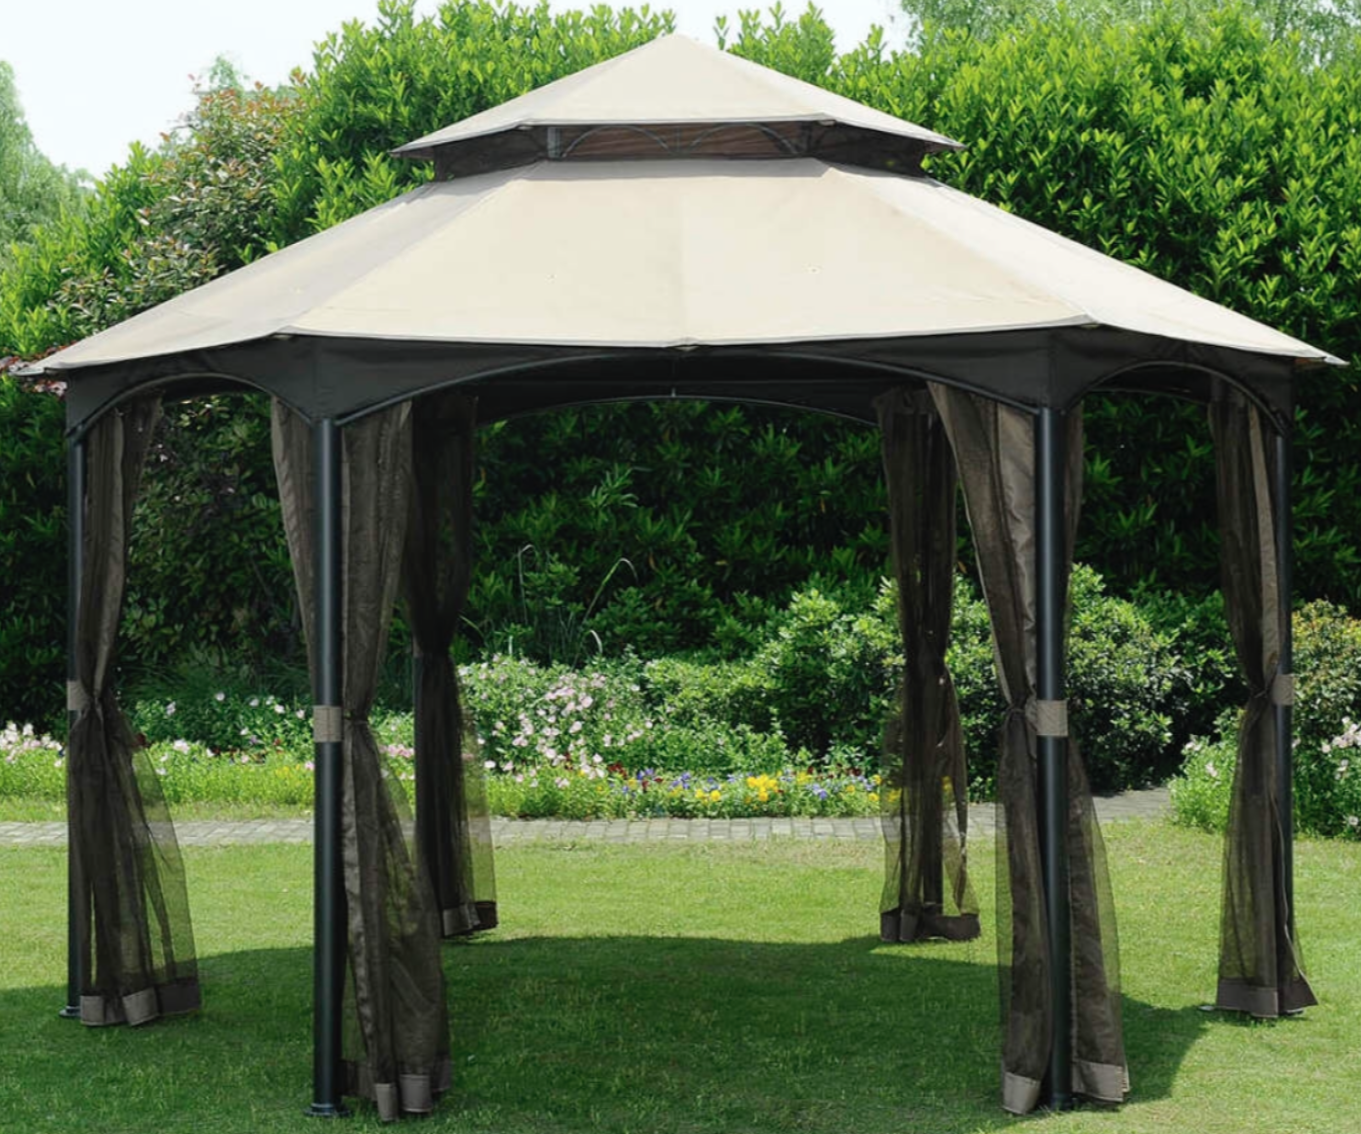 North bay Replacement Canopy and Screen Combo Big Lots Original Manufacturer